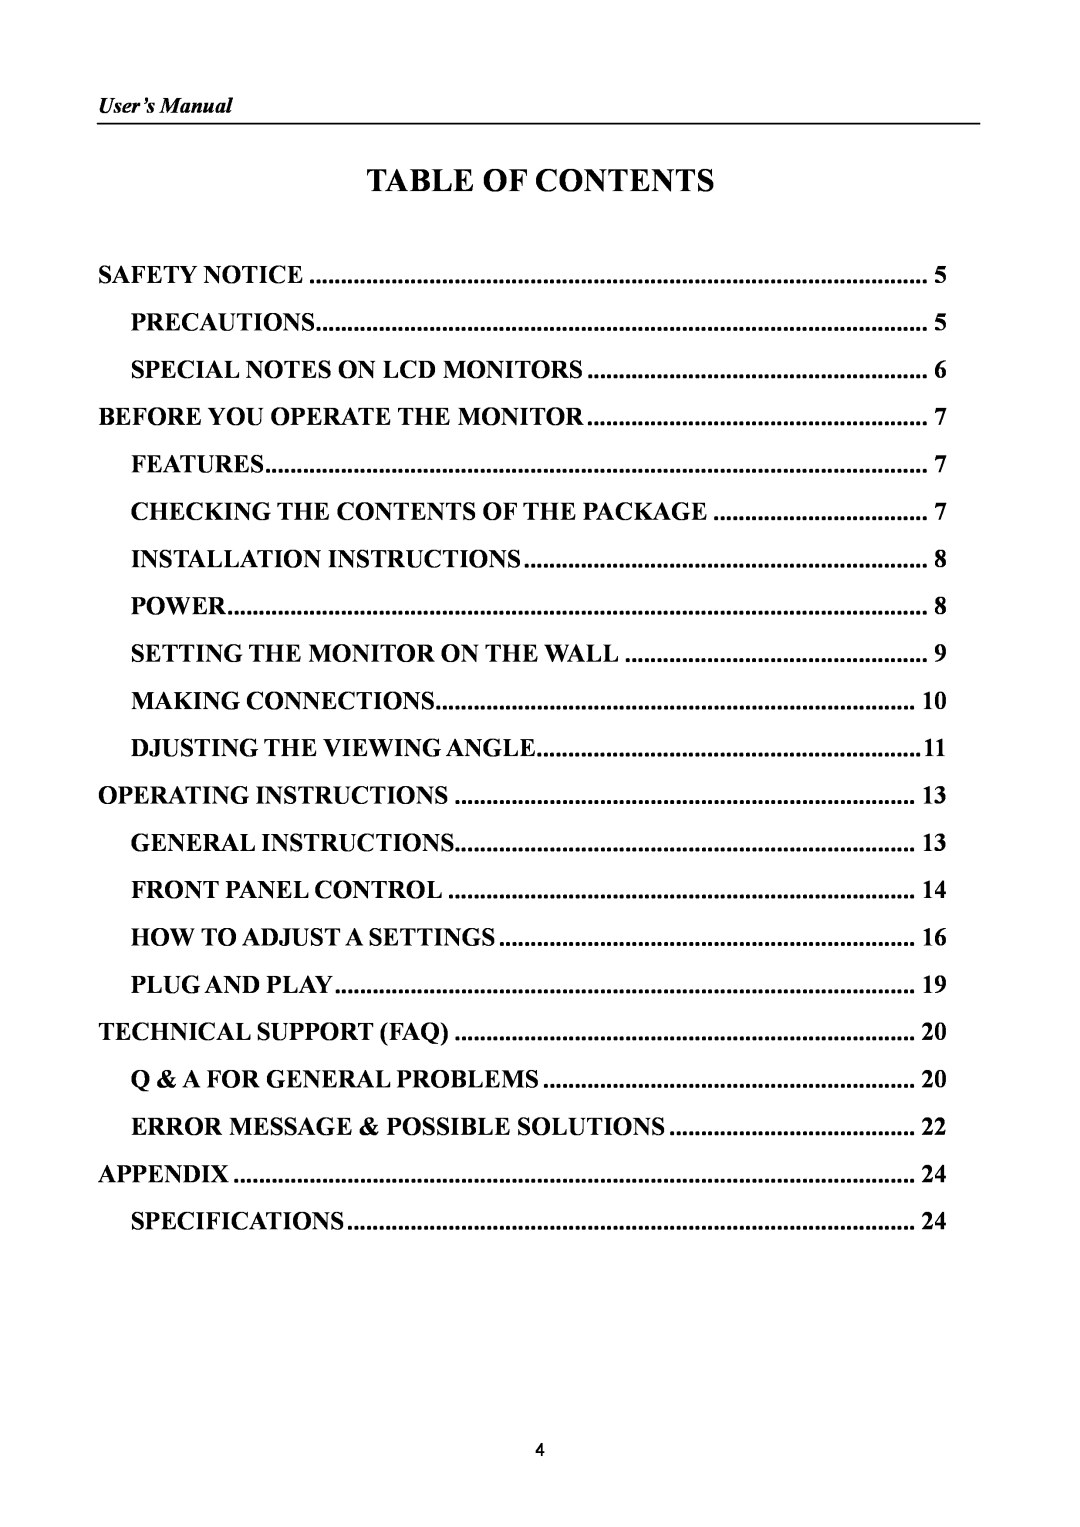 HANNspree HF205 manual Table Of Contents, Error Message & Possible Solutions 